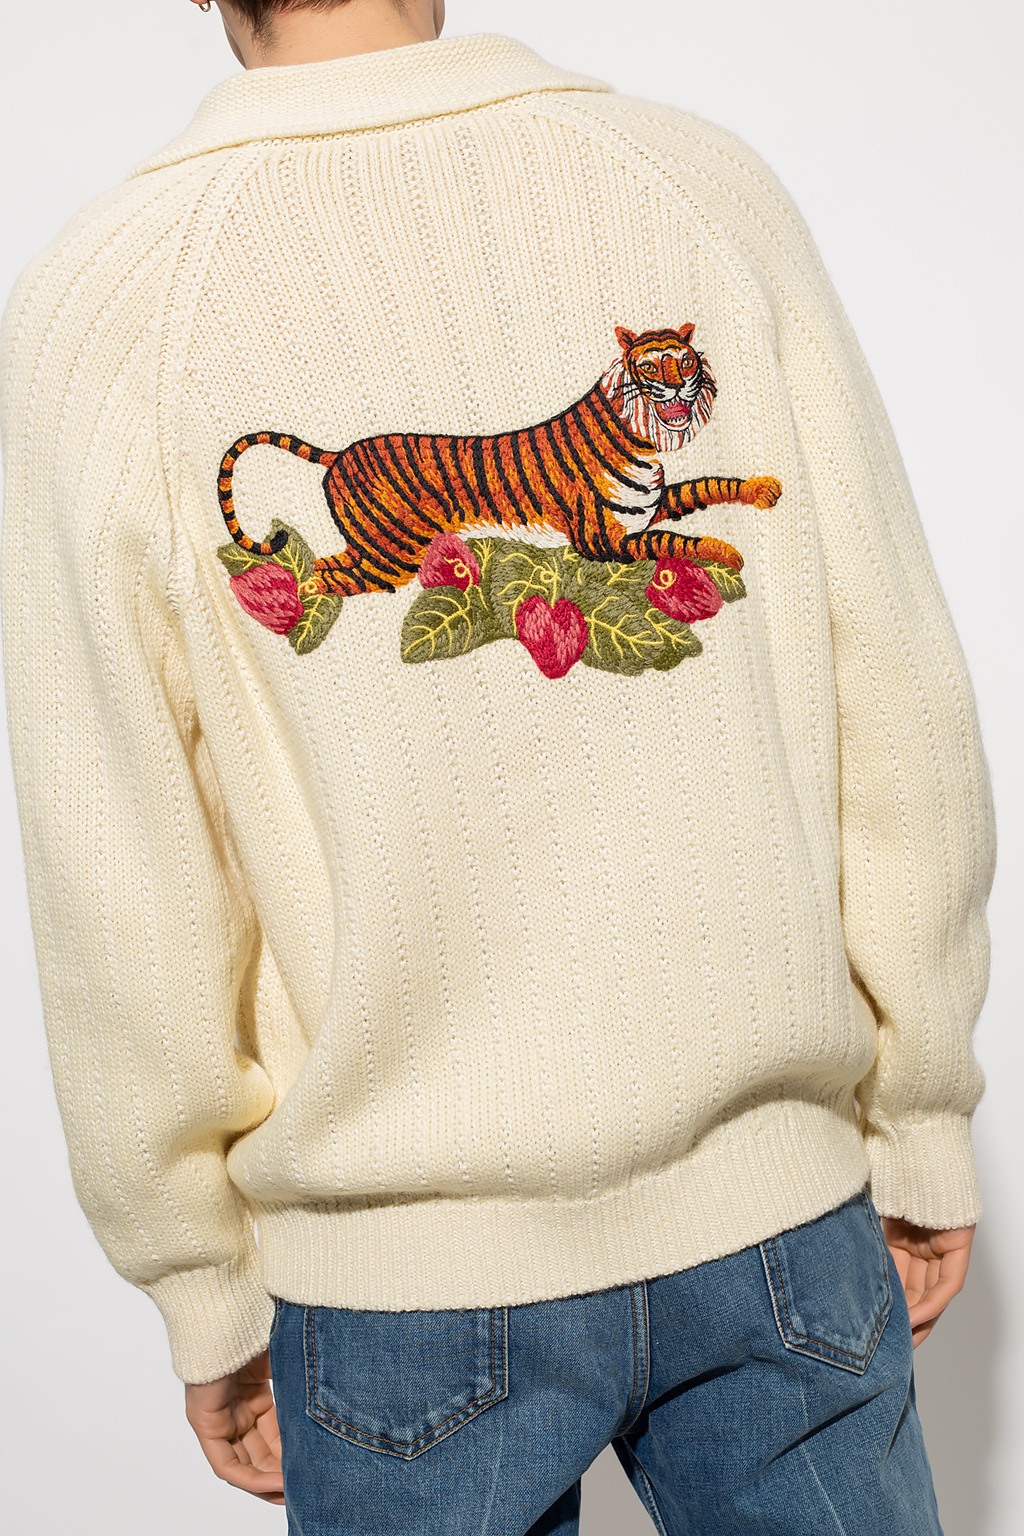 Cream Sweater from the 'Gucci Tiger' collection Gucci - Vitkac Slovakia